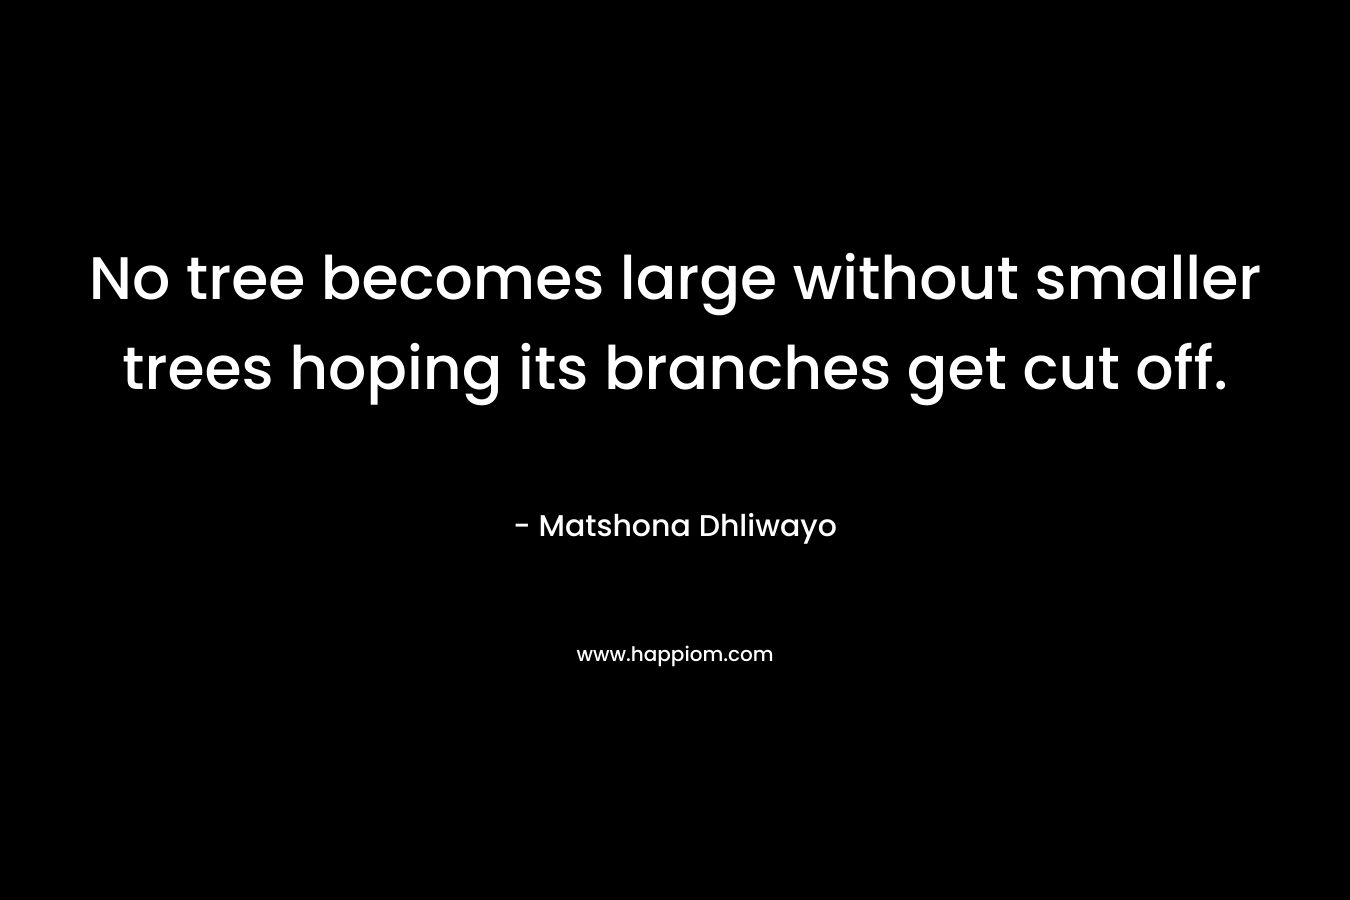 No tree becomes large without smaller trees hoping its branches get cut off.